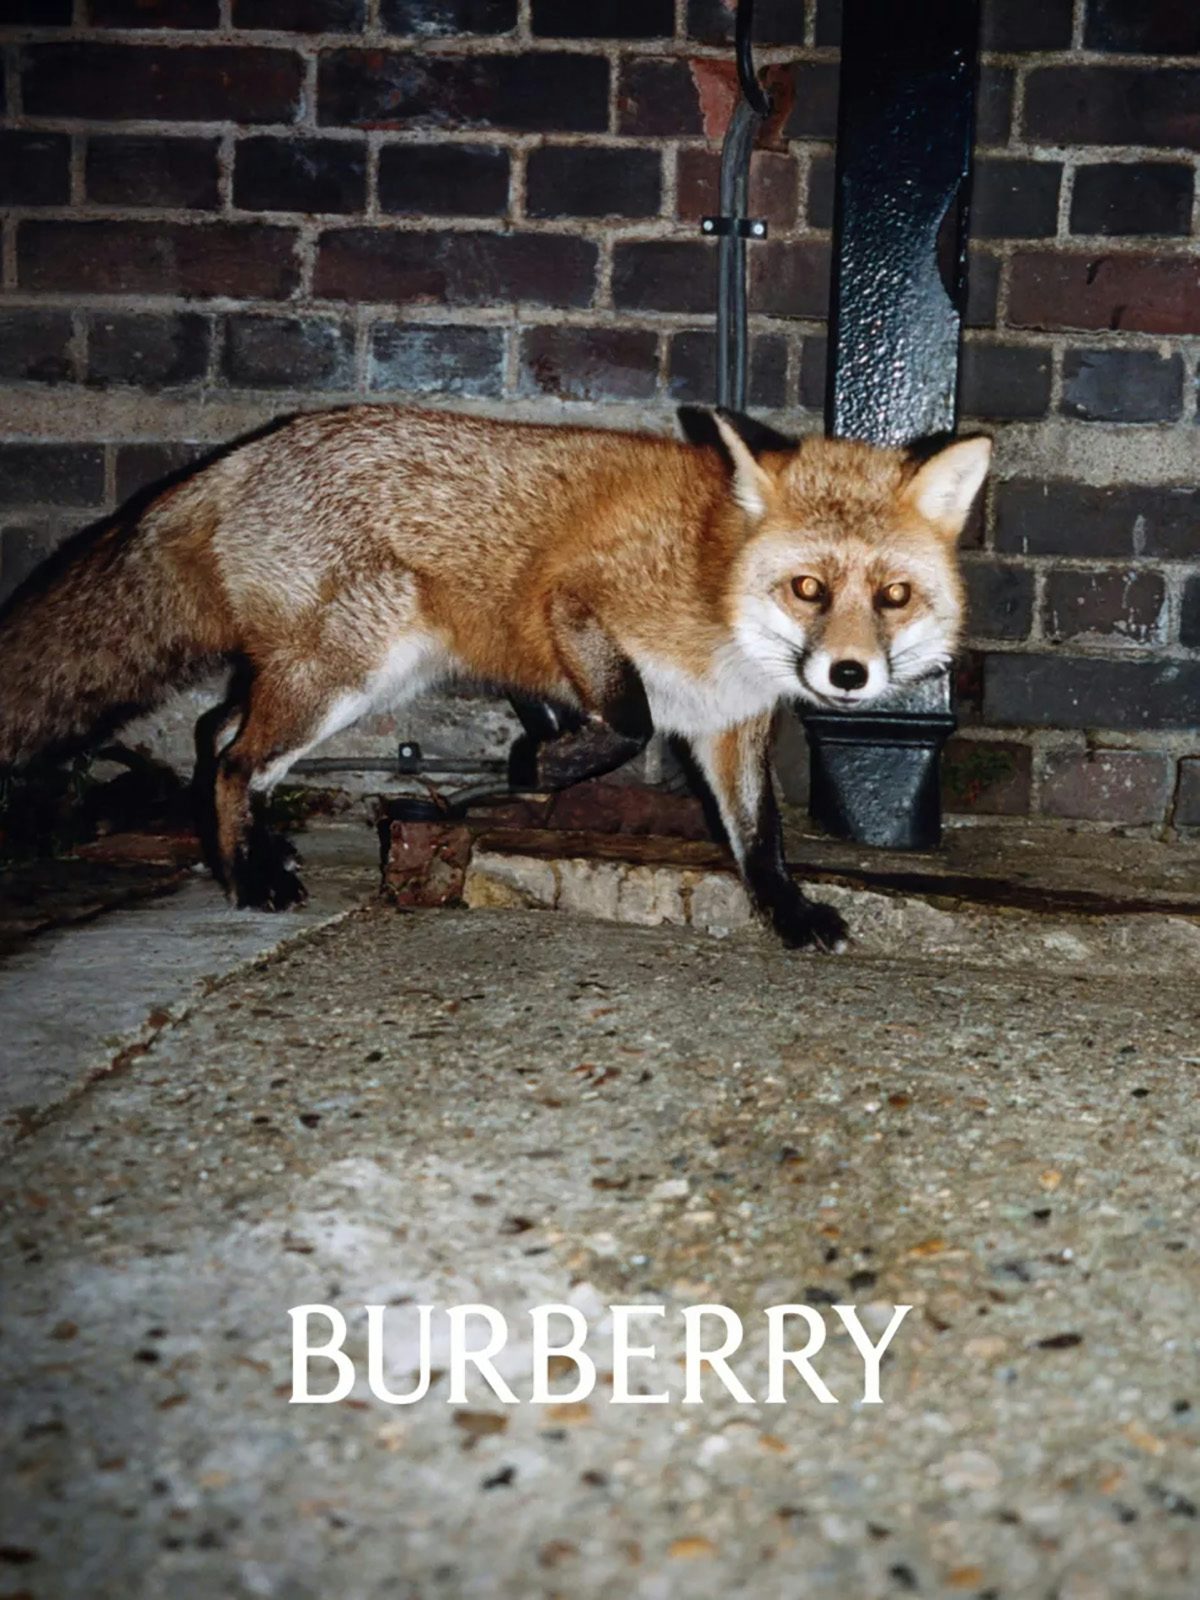 Image by Tyrone Lebon of a fox in the street looking at the camera, alongside the new Burberry branding